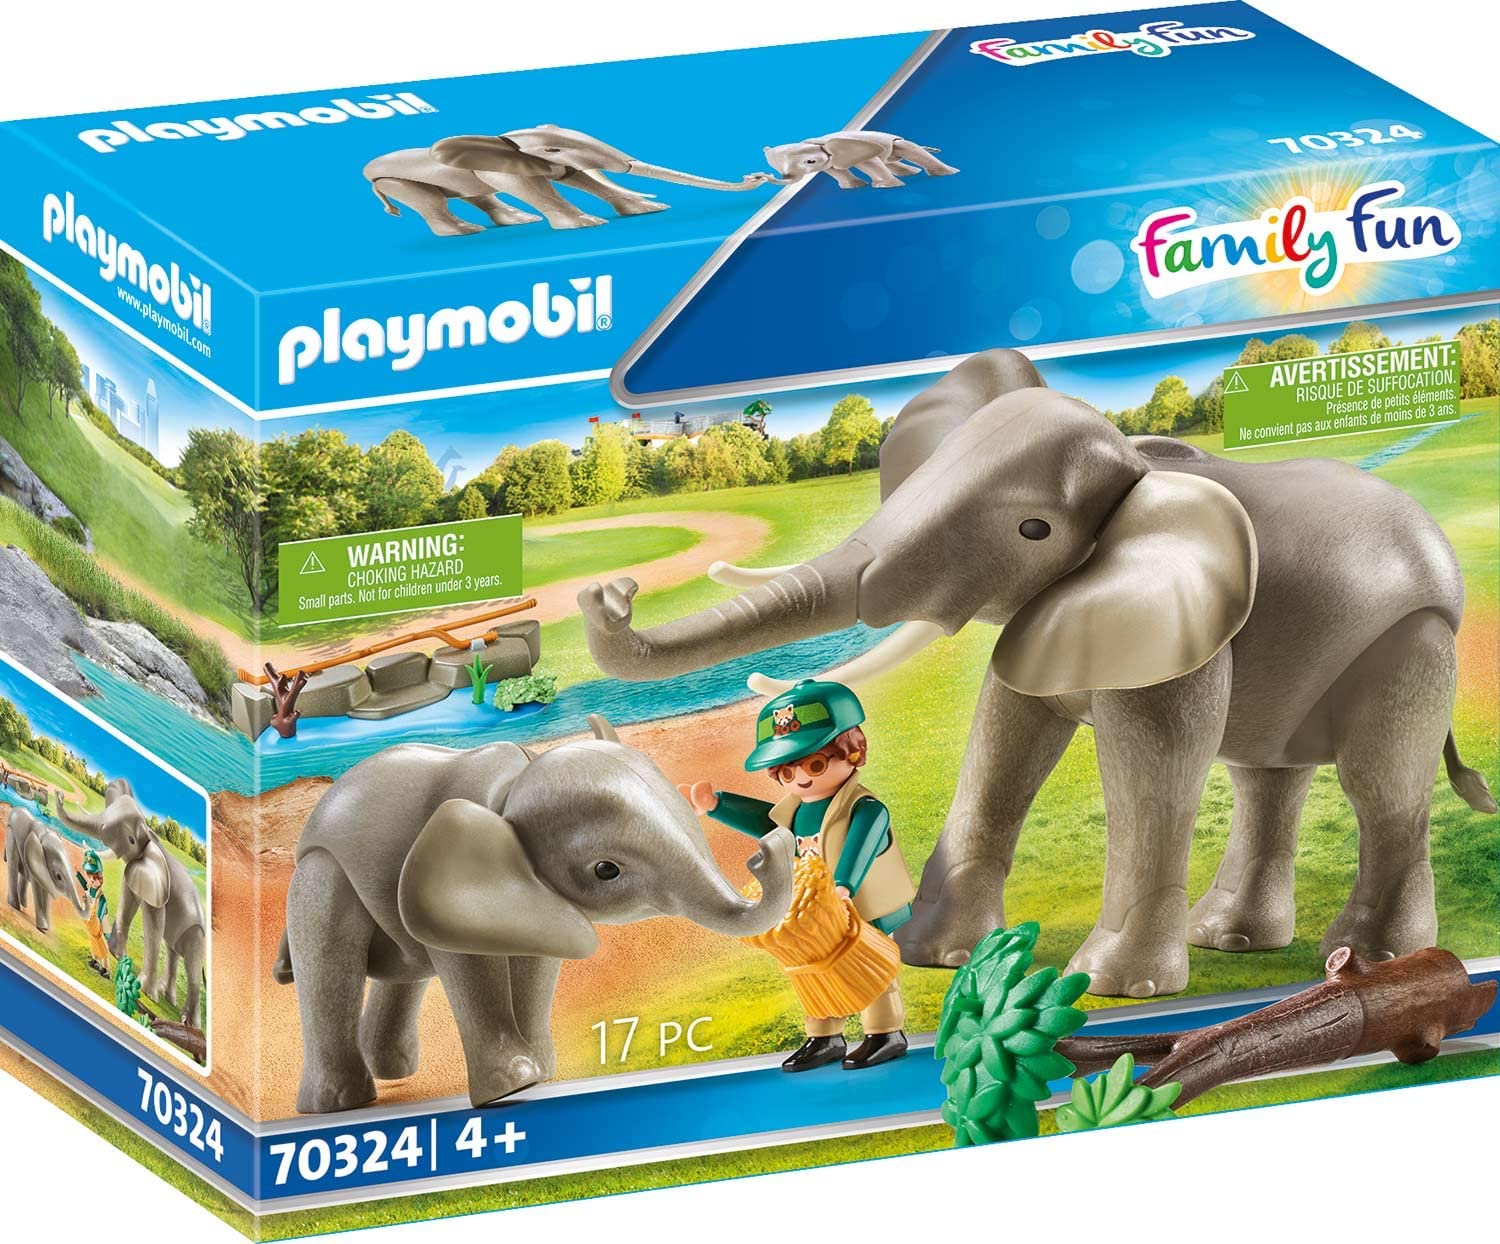 Playmobil 70324 Elephants In Outdoor Enclosure 4 Years And Above